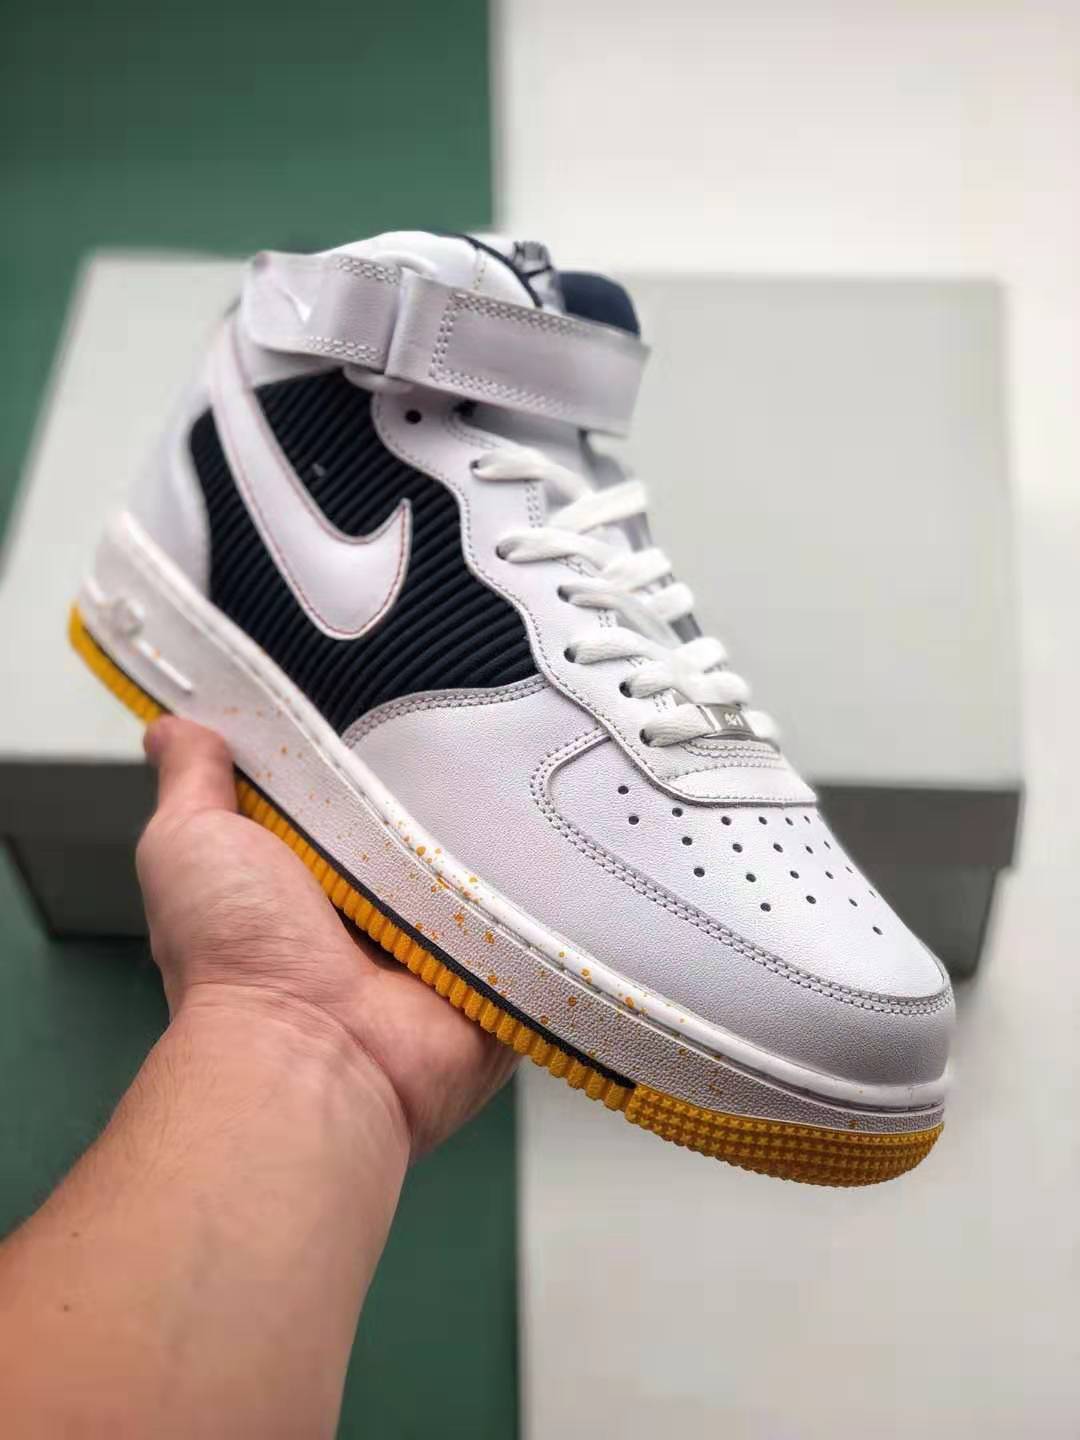 Nike Air Force 1 Mid White Black Yellow 596728-306 - Bold and Stylish Sneakers